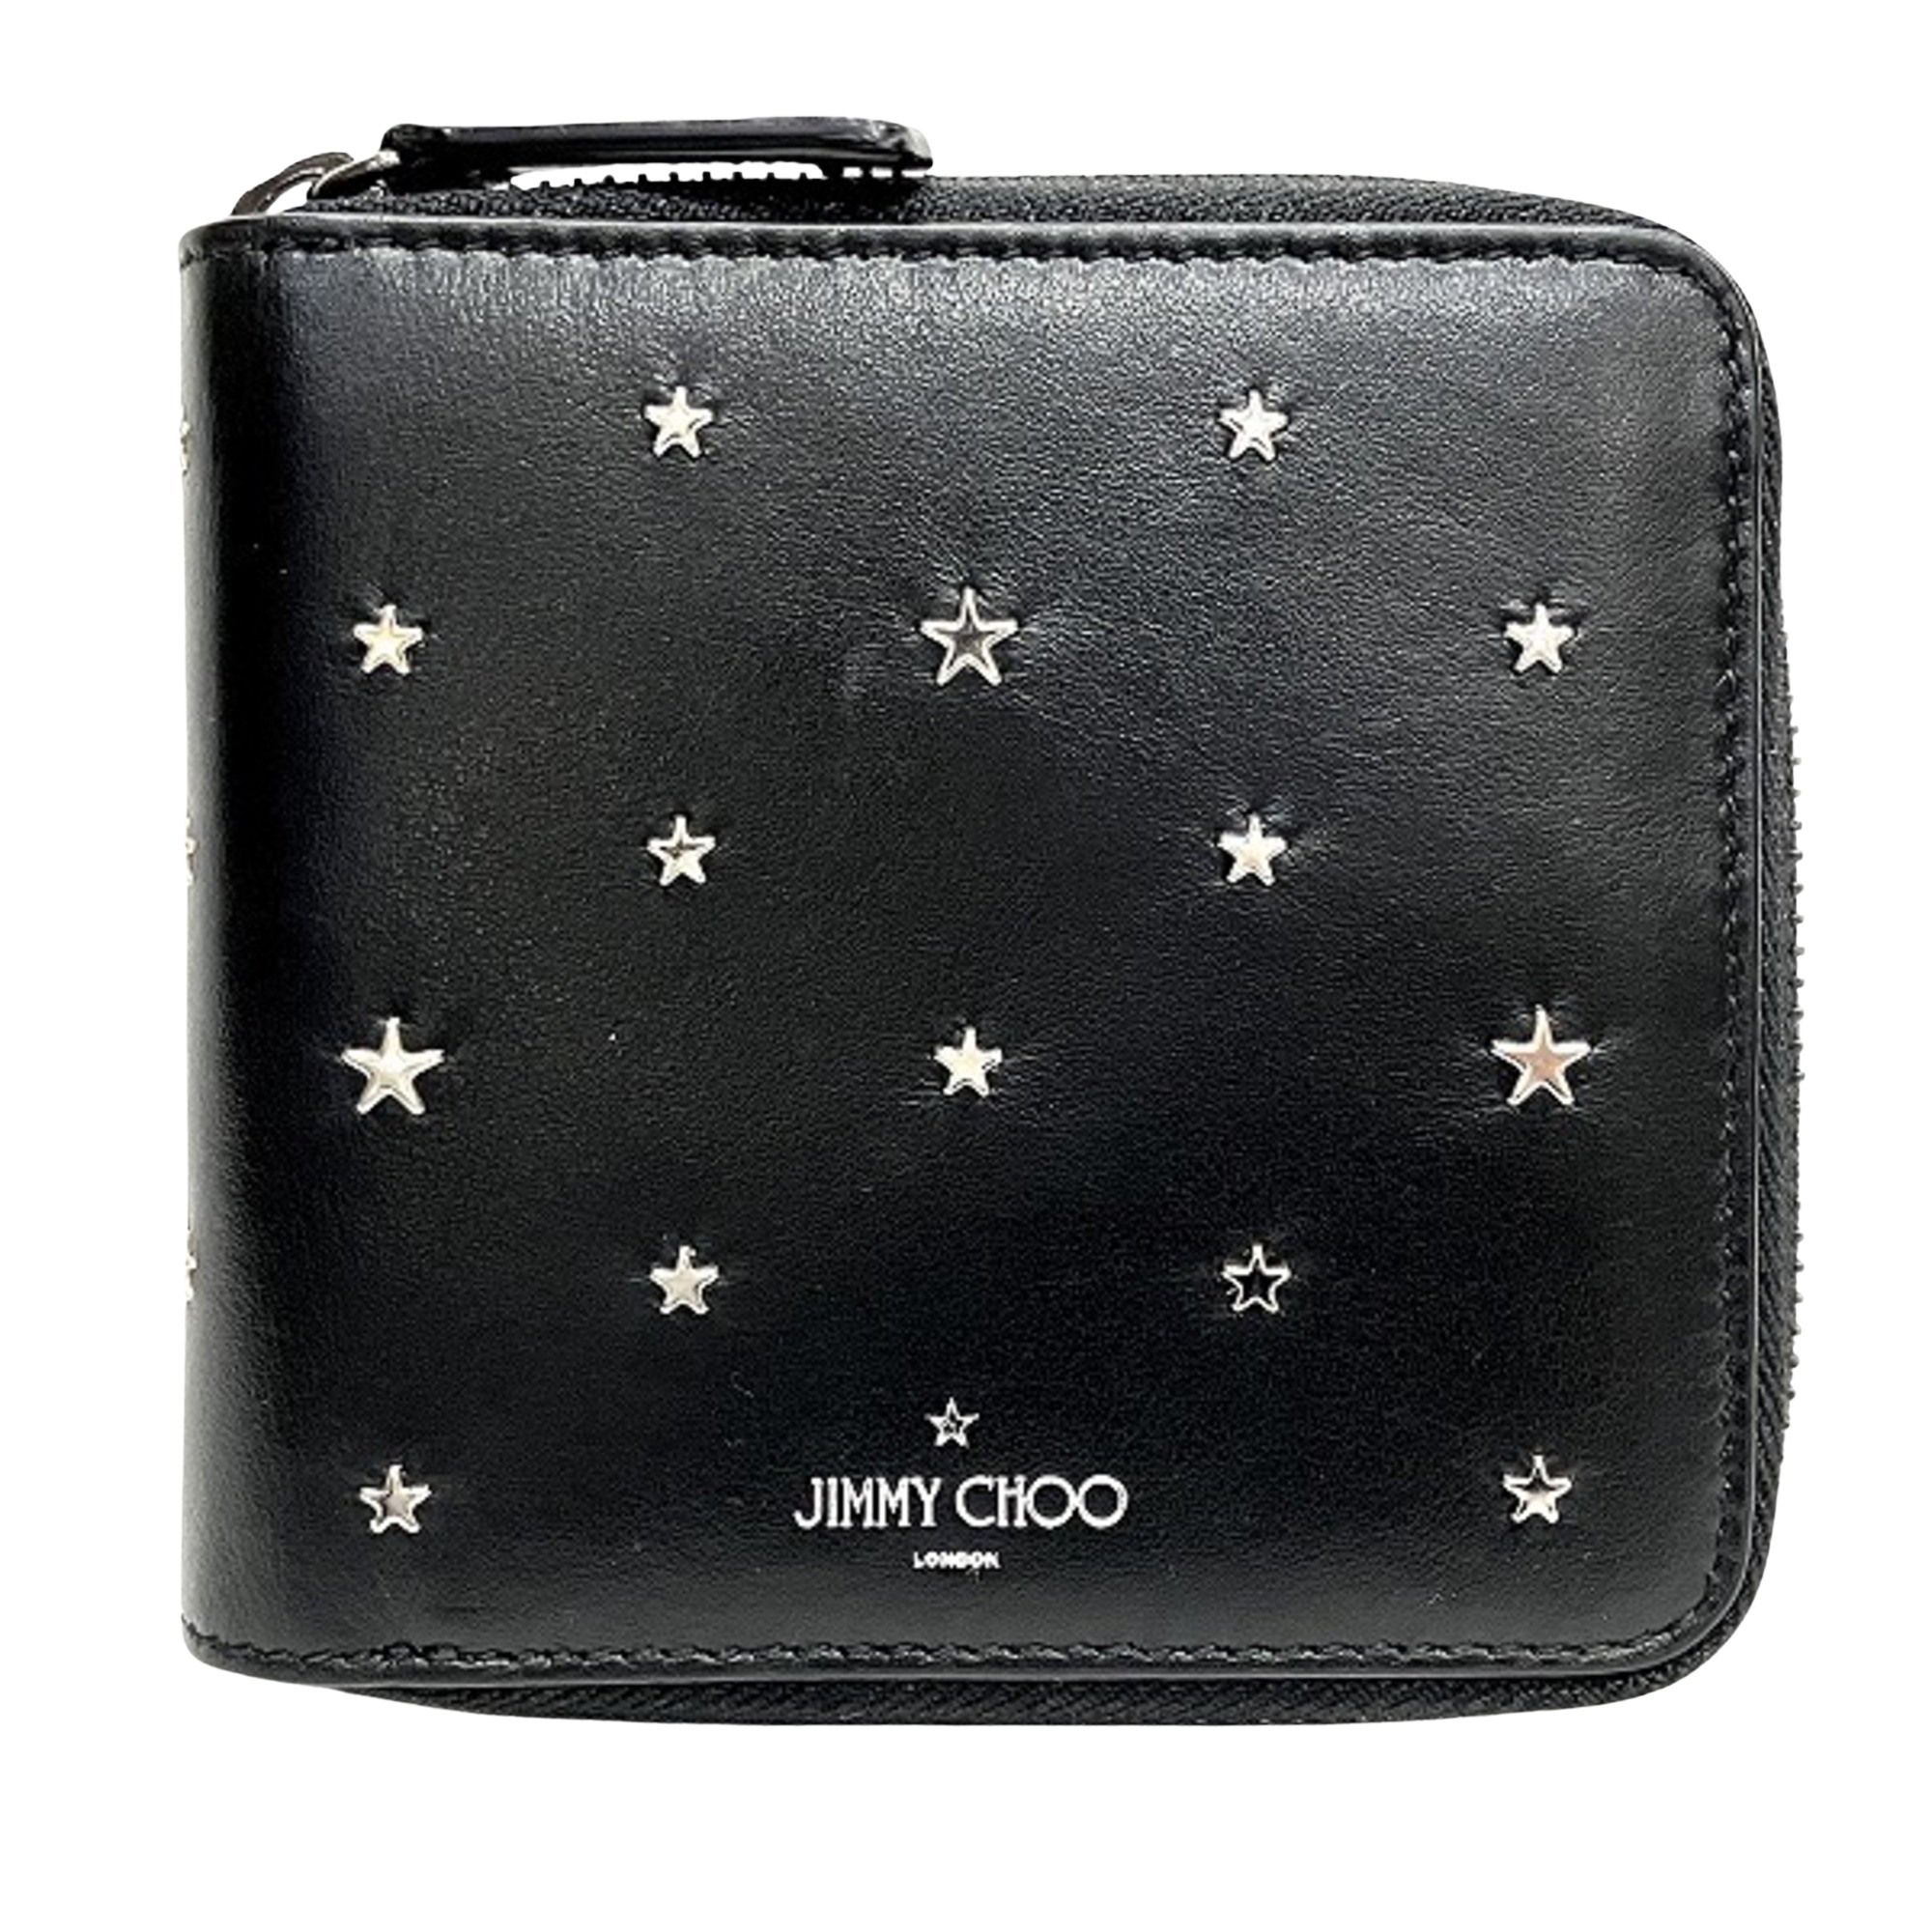 Luxurious Black Leather Coin Purse for Women - Sleek and Practical Accessory